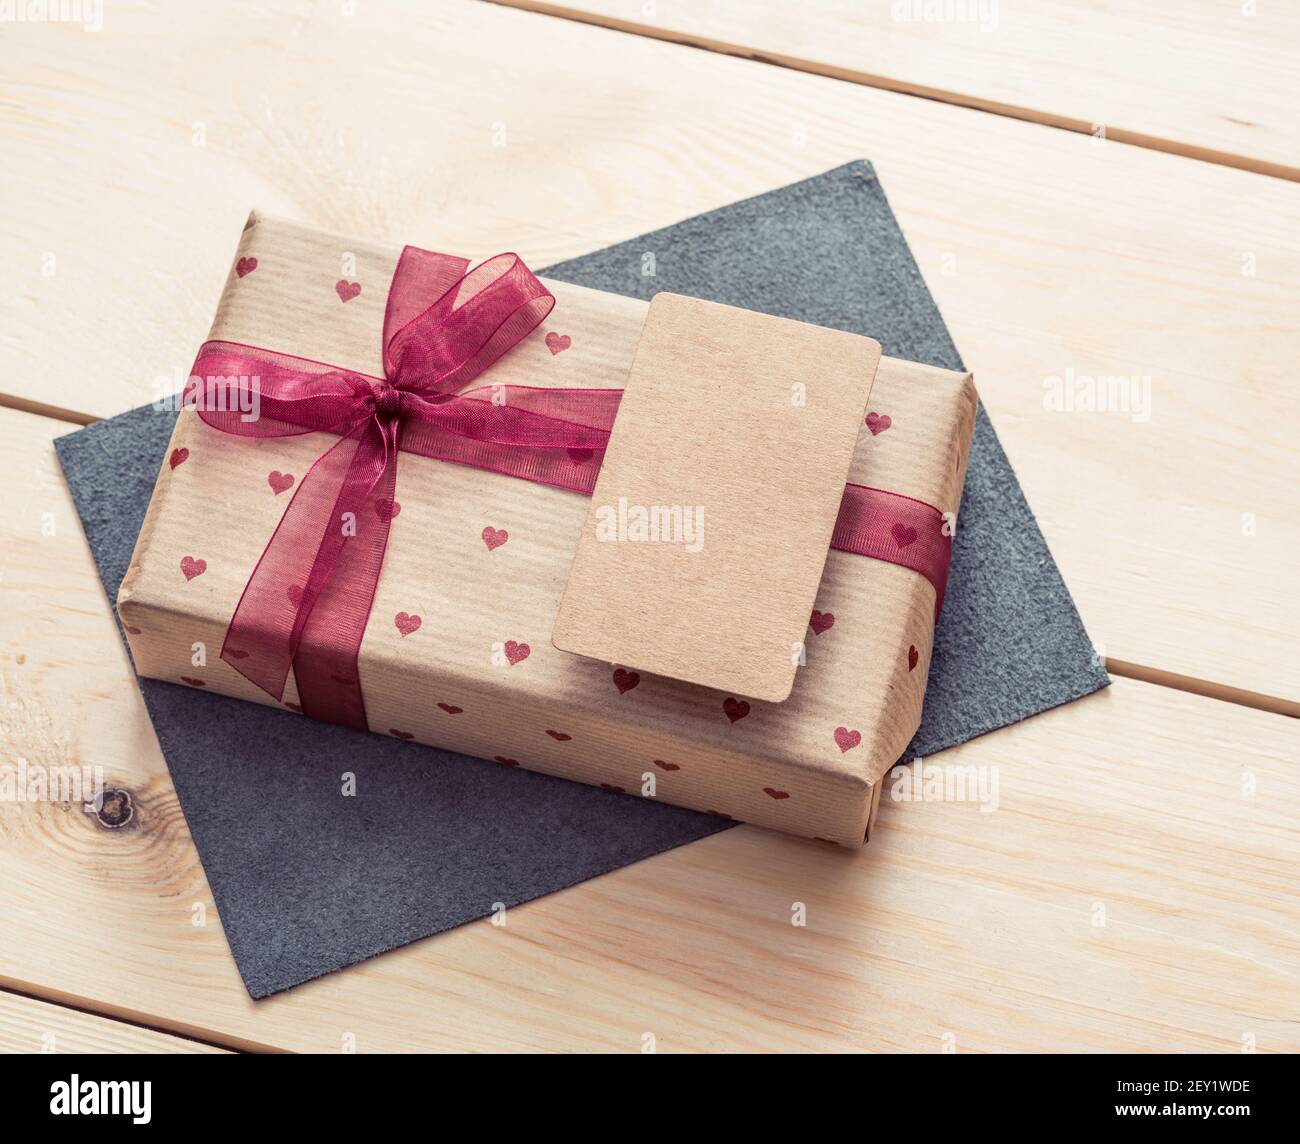 Gift box with blank tag. Stock Photo